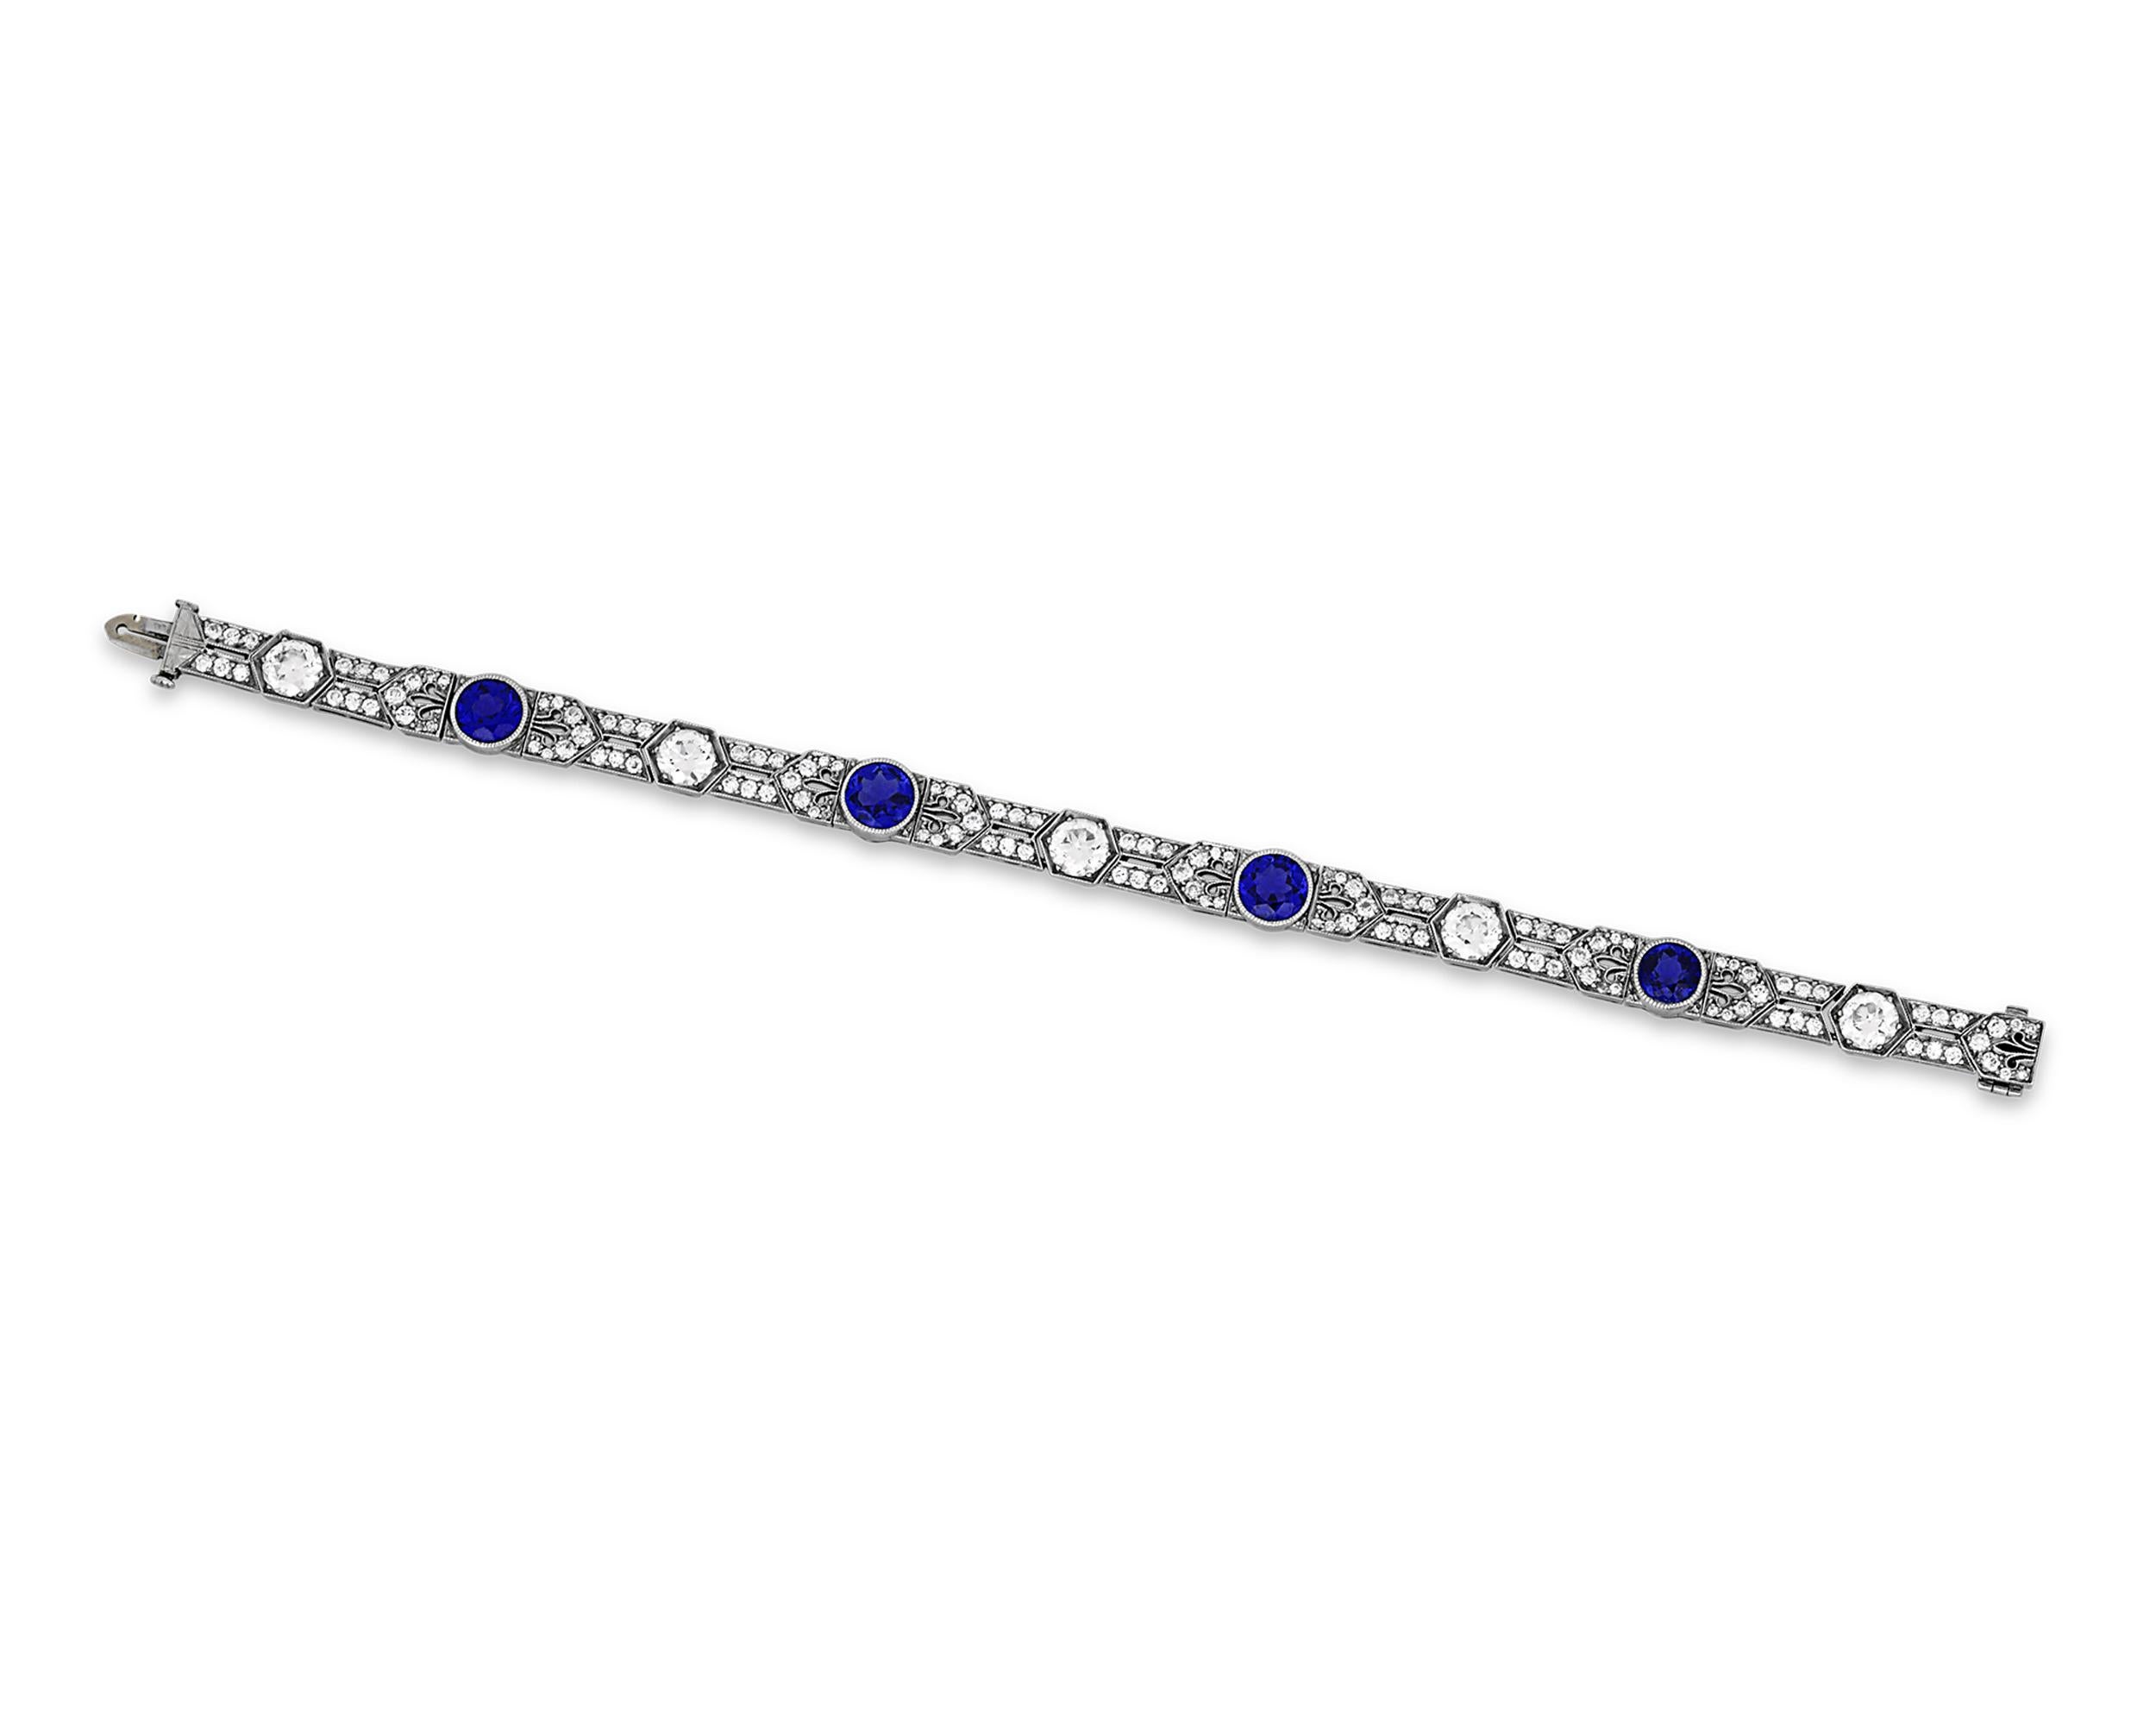 Four remarkable Yogo sapphires are the stars of this amazing Art Deco bracelet by Tiffany & Co. The jewels, which weigh a combined 4.68 carats, are certified by the AGL and GIA to be untreated, making them some of the finest sapphires available on